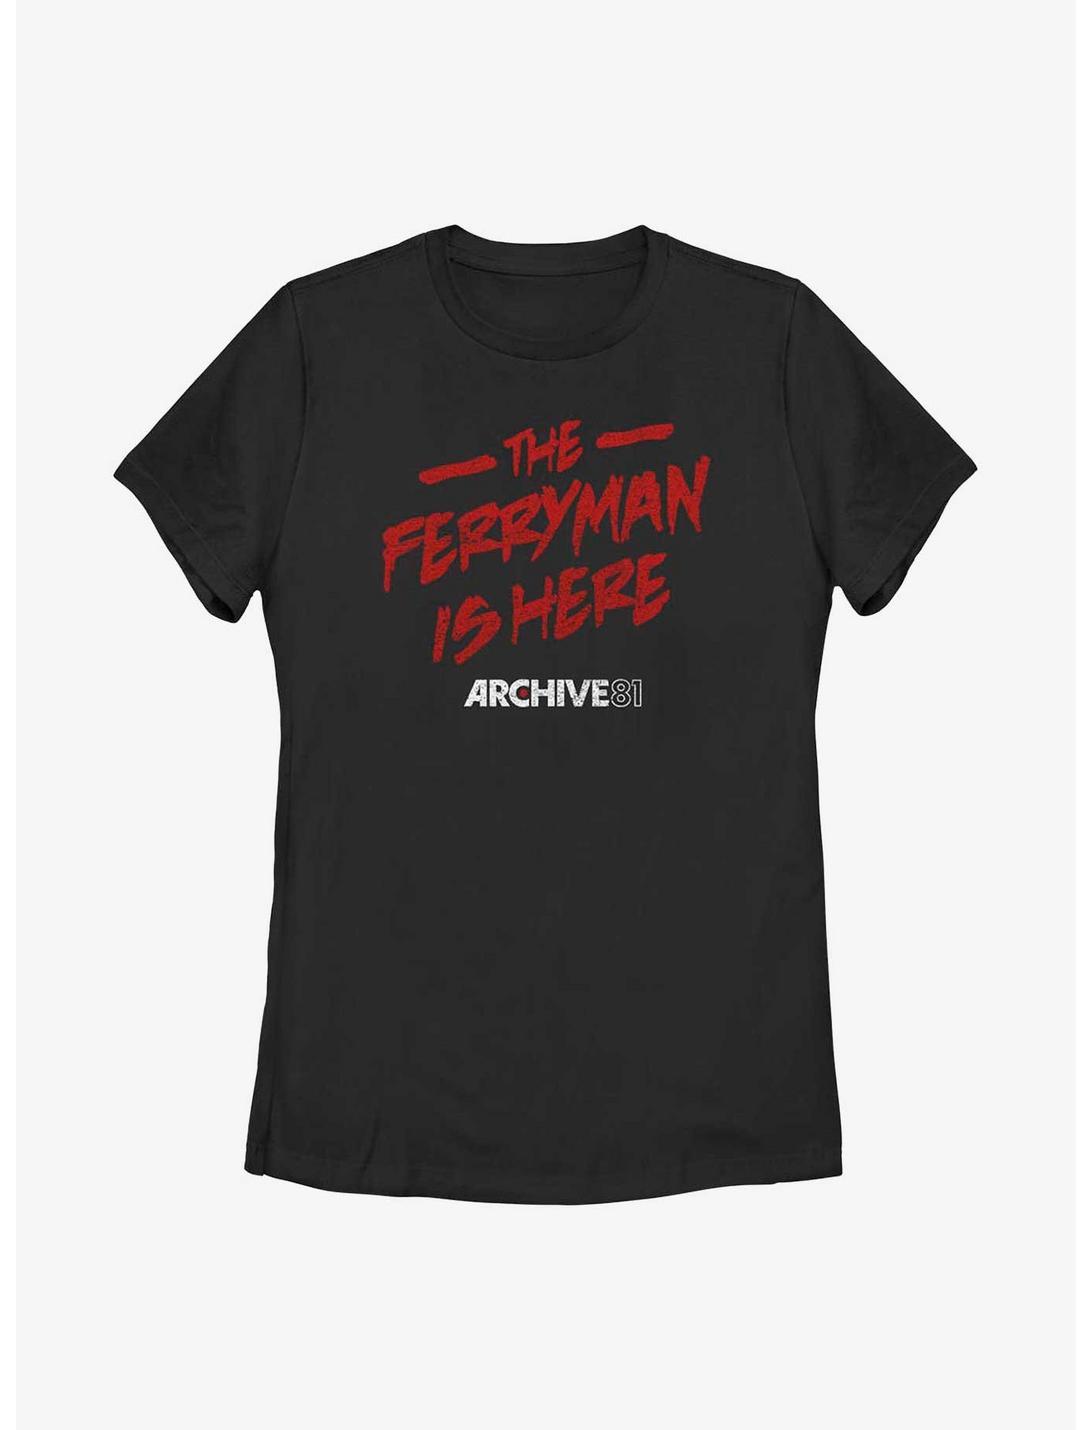 Archive 81 The Ferryman Is Here Womens T-Shirt, BLACK, hi-res